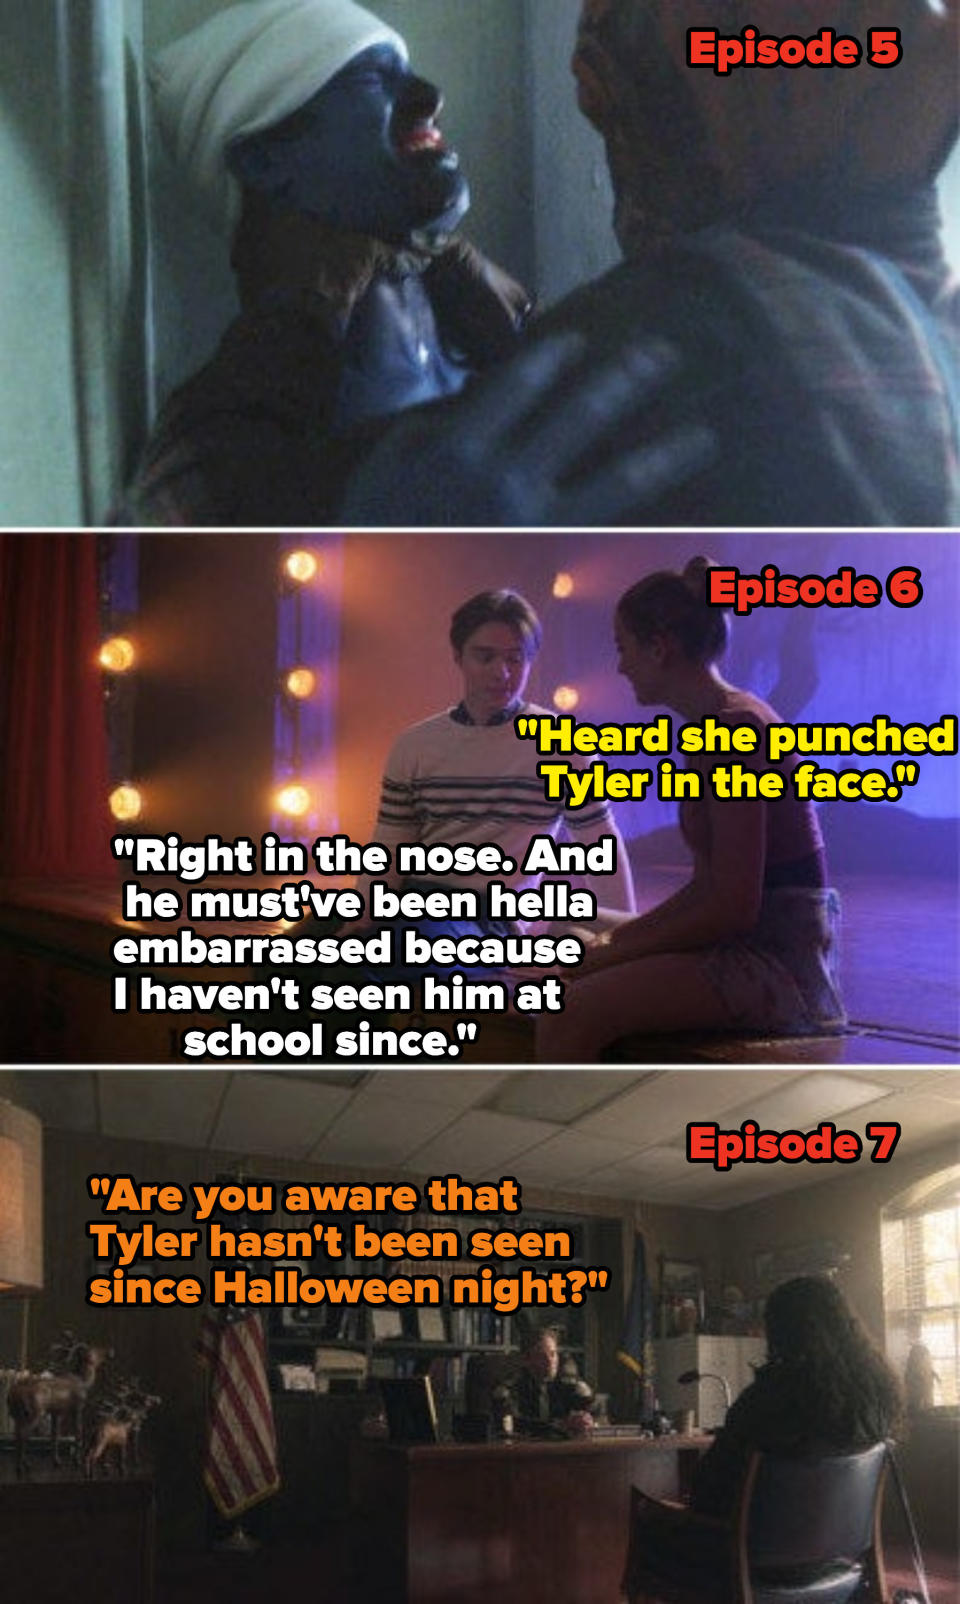 Tyler being killed in Episode 5, students saying in Episode 6 that he was punched in the nose and must've been embarrassed 'cause he hasn't been seen since, and in Episode 7 someone saying "Are you aware that Tyler hasn't been seen since Halloween night?"